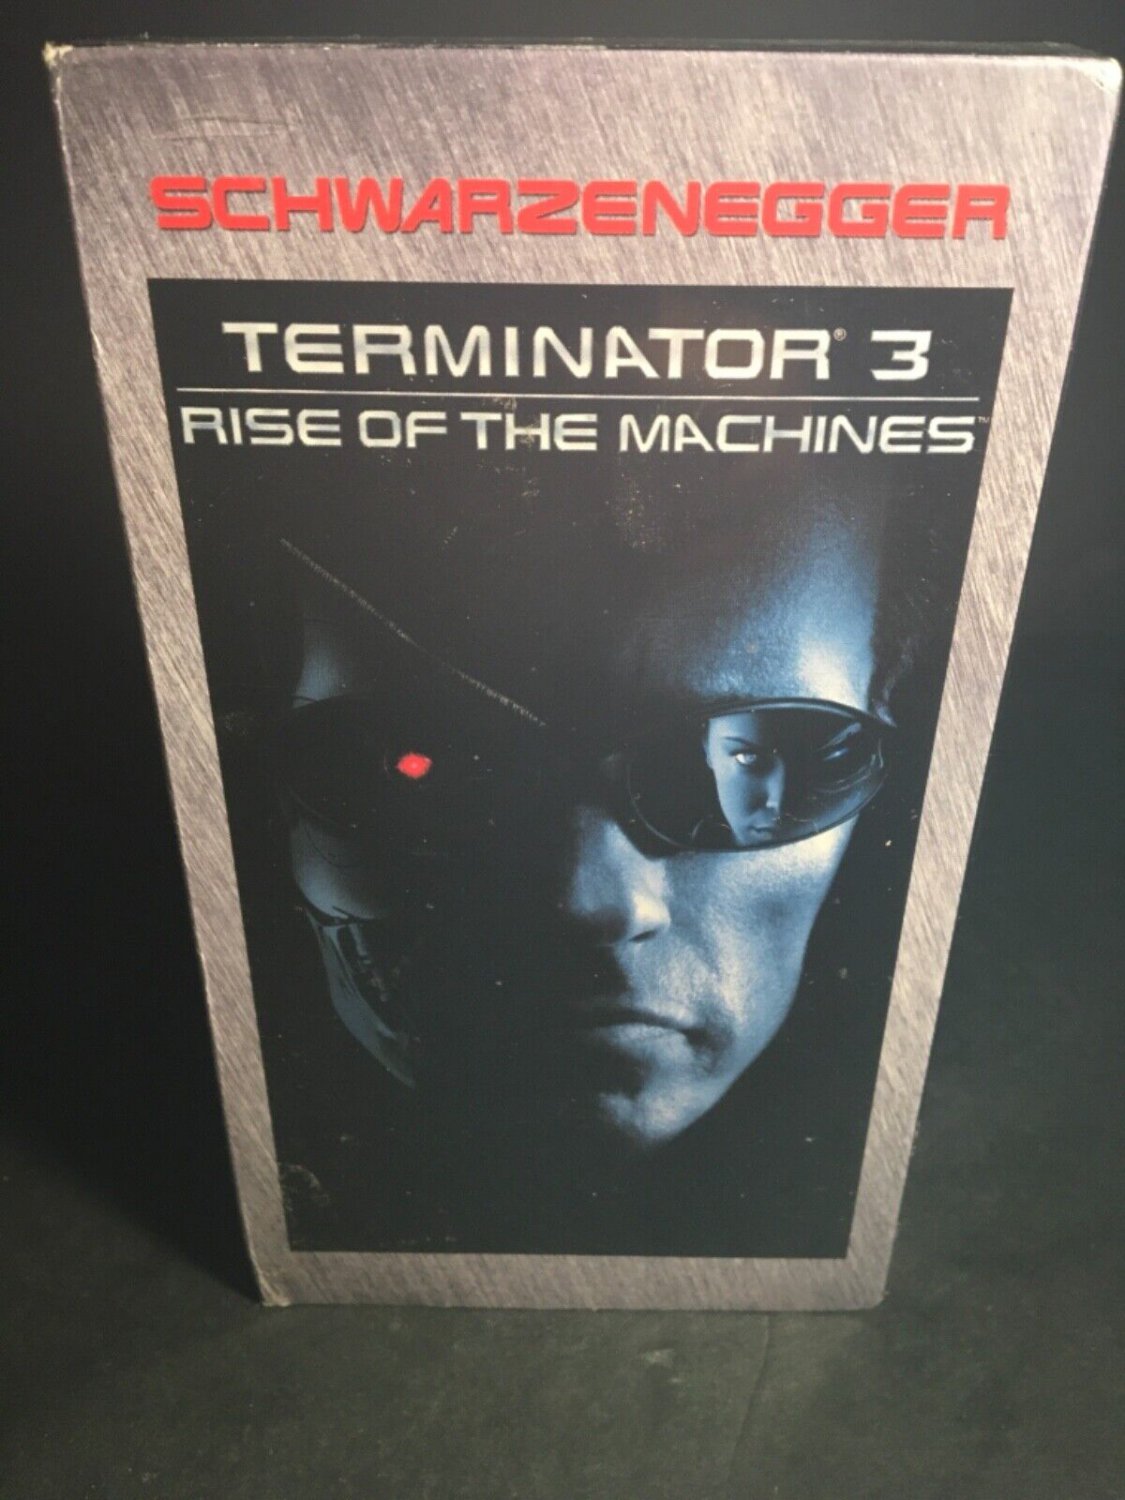 Terminator 3: Rise of the Machines (VHS, 2003, Pan Scan) Factory Sealed New